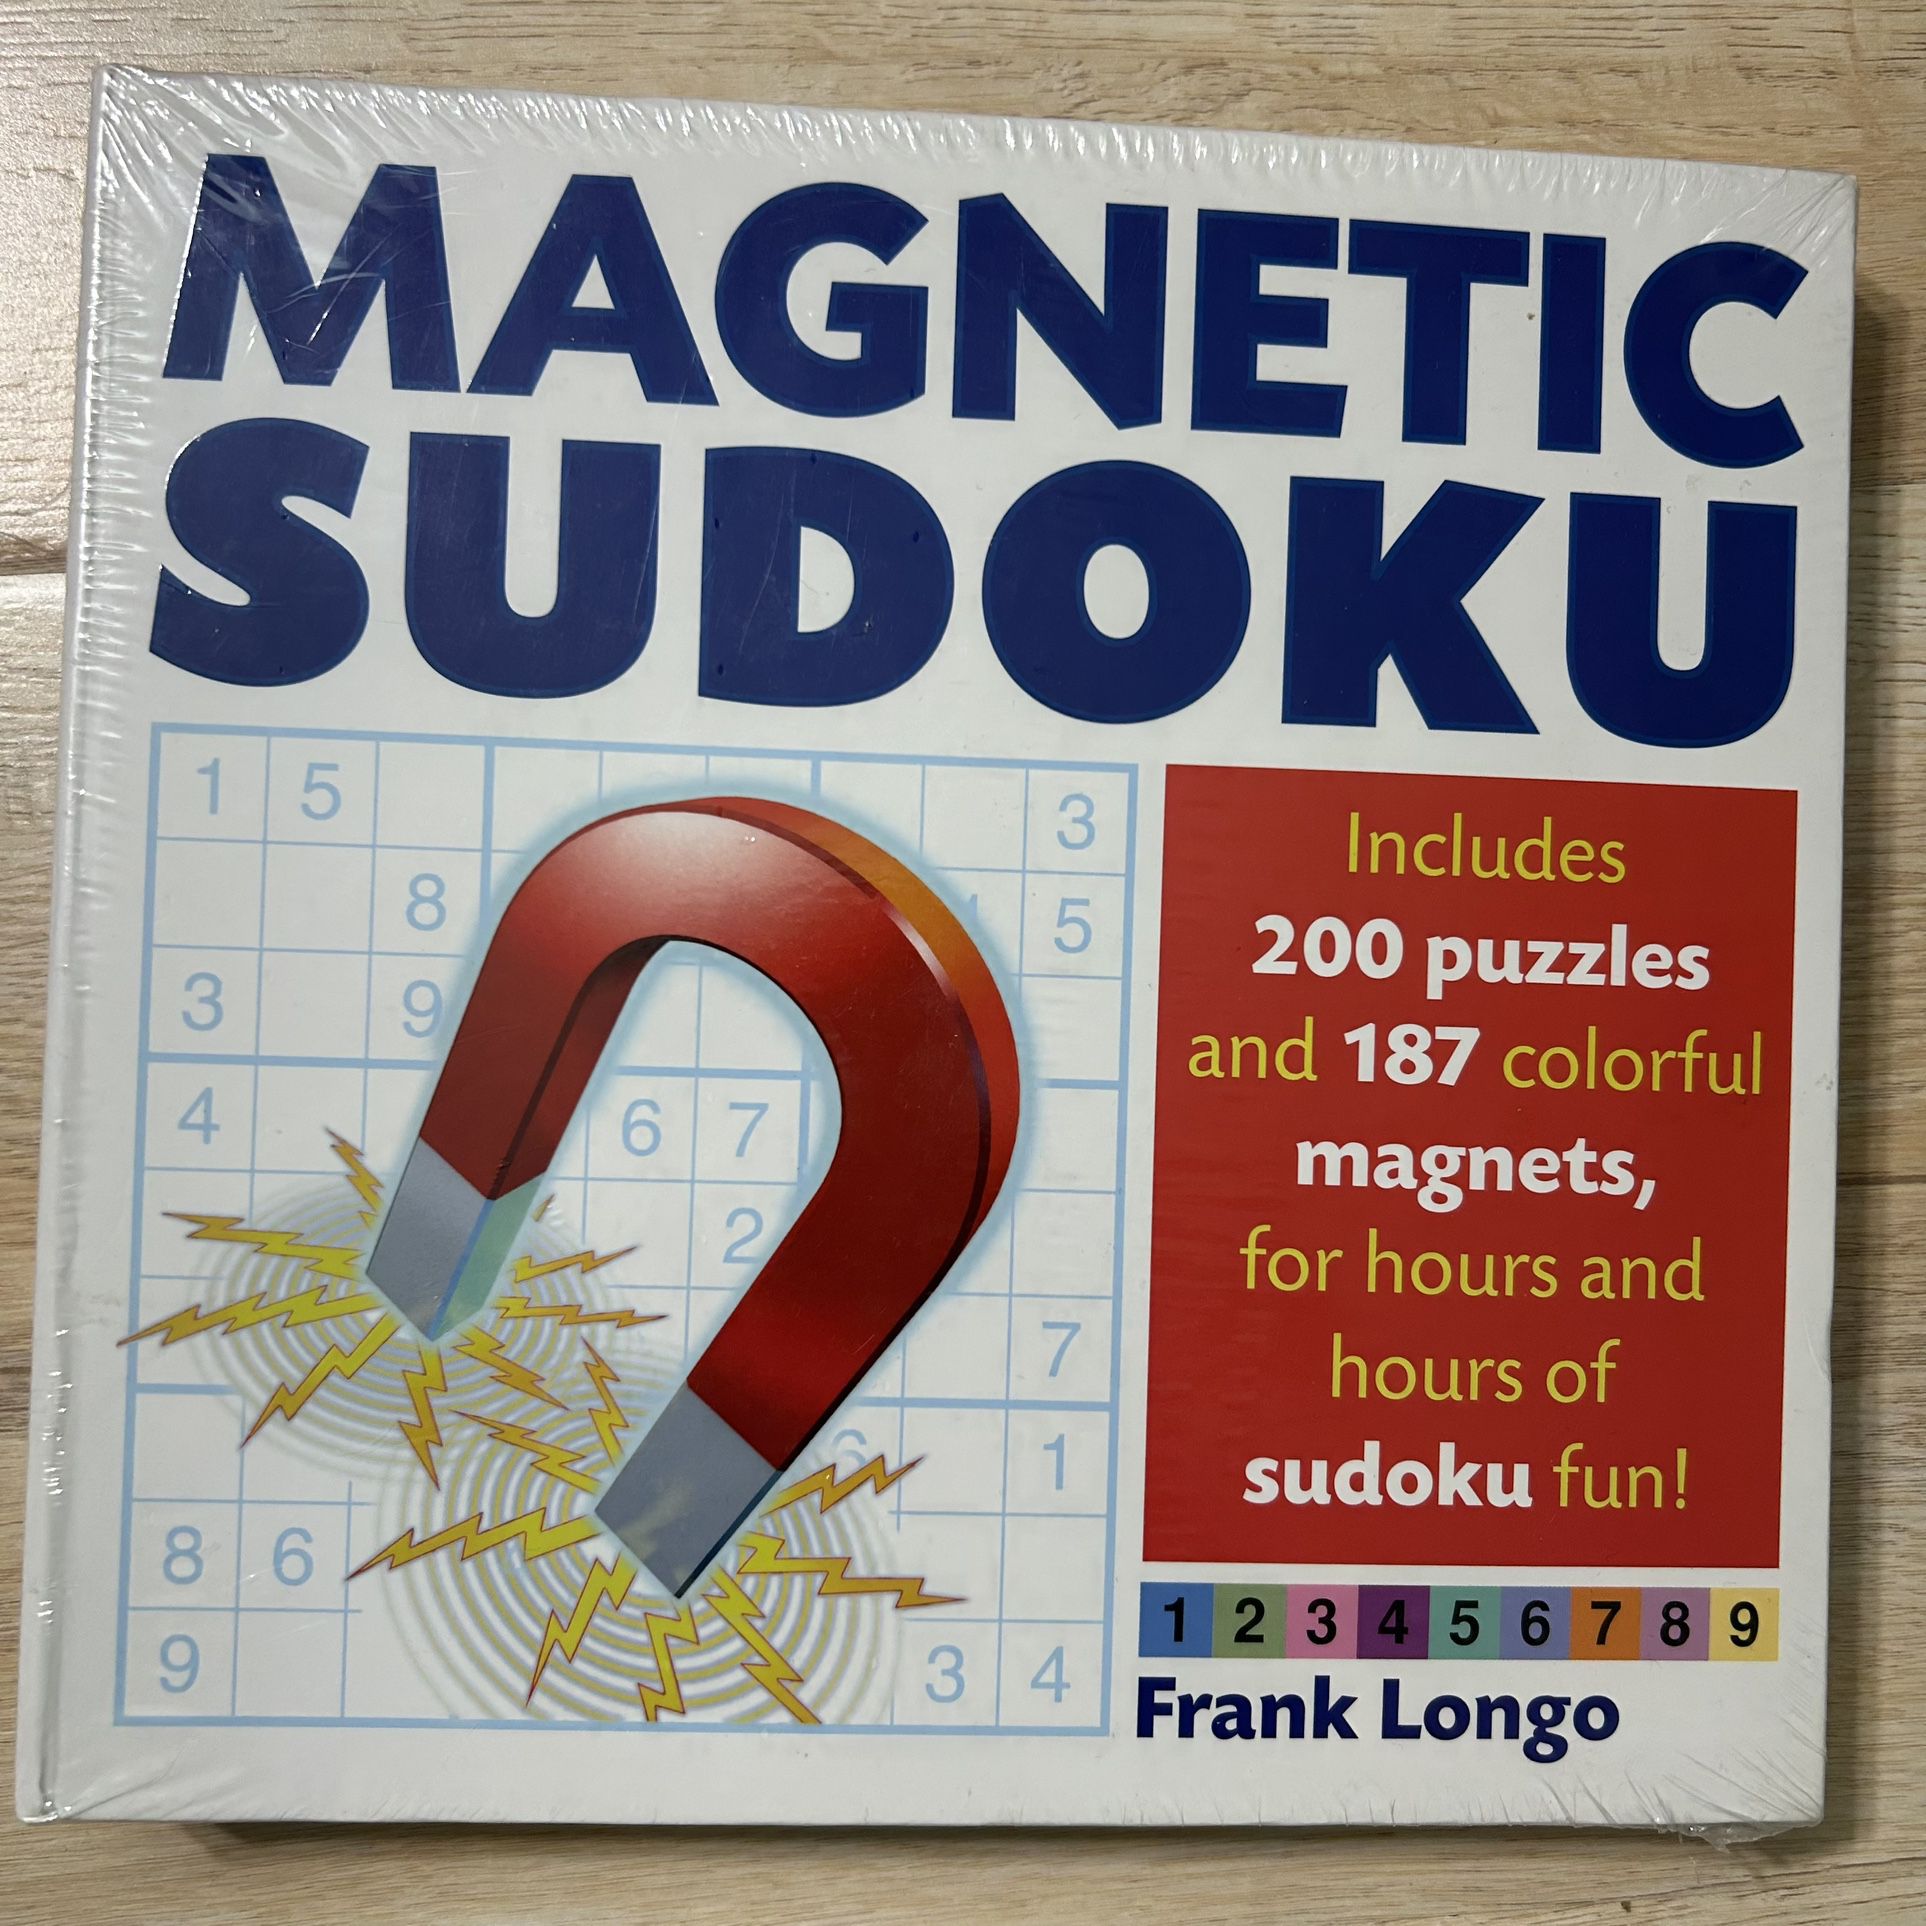 Magnetic Sudoku Game by Frank Longo